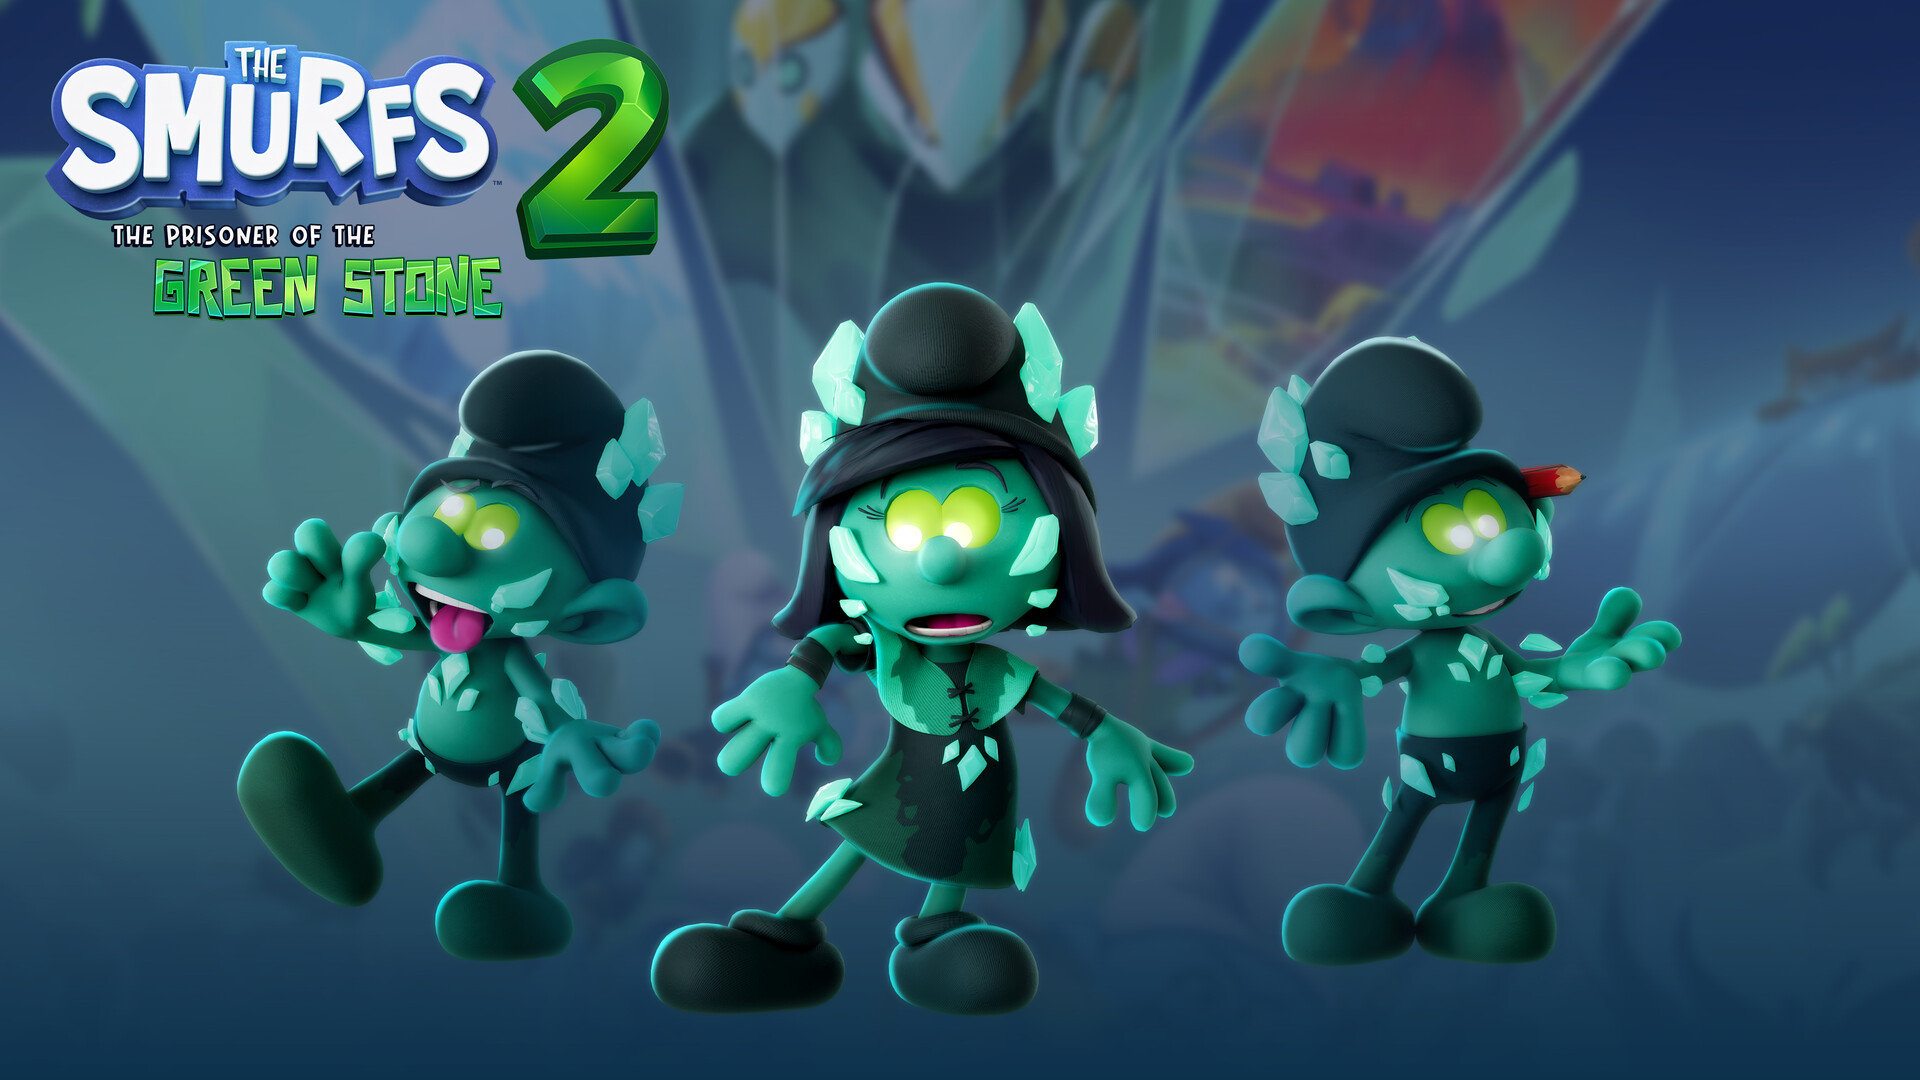 The Smurfs 2: The Prisoner of the Green Stone - Corrupted Outfit DLC GOG CD Key (1.3$)